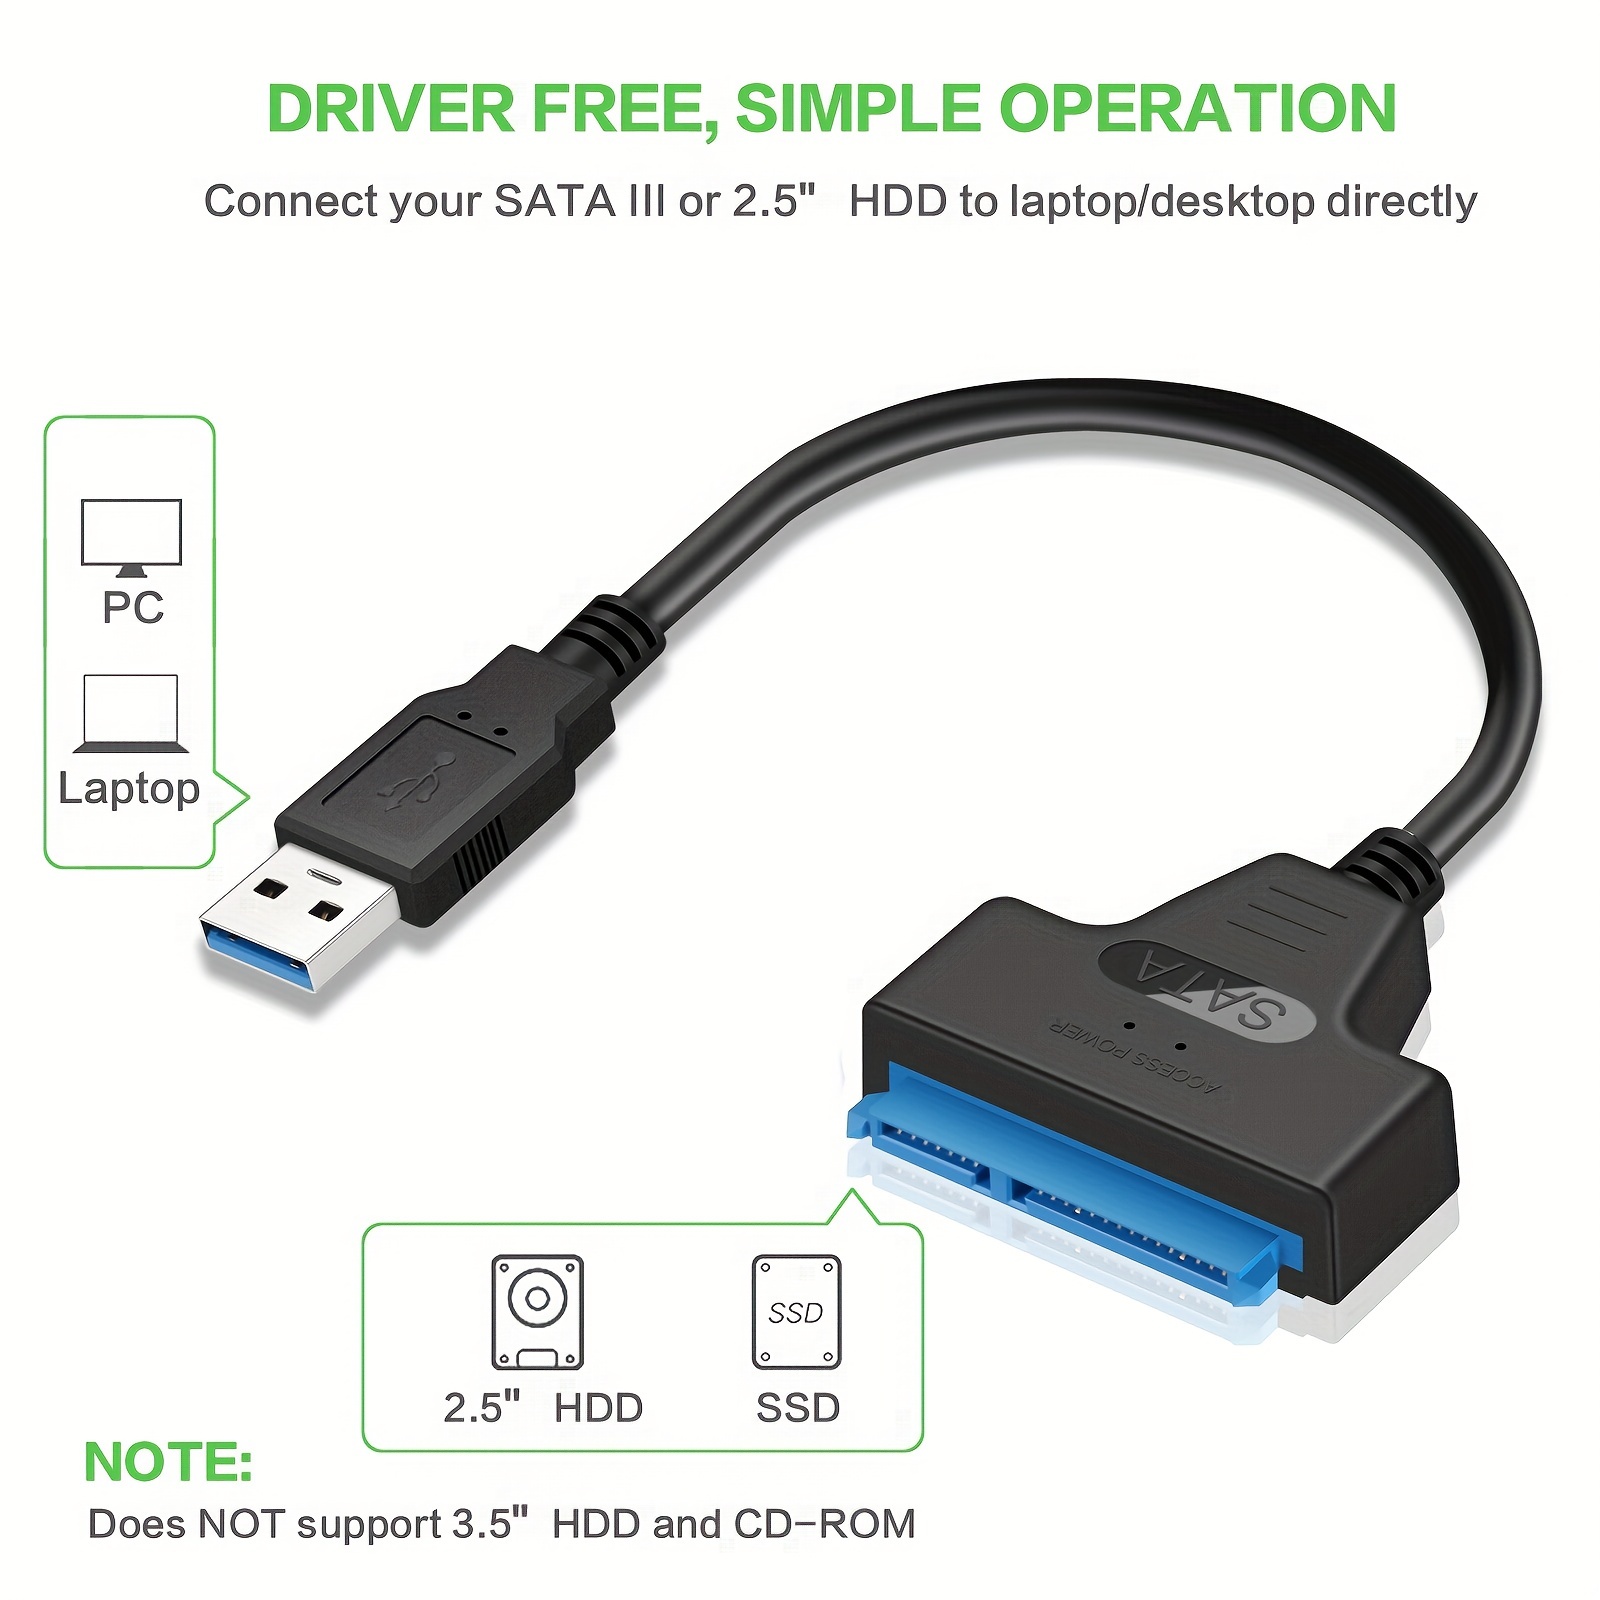 Adapter/Converter SATA 7+15 22 Pin to USB 2.0 Adapter Cable for 2.5 HDD  Laptop Hard Disk Drive